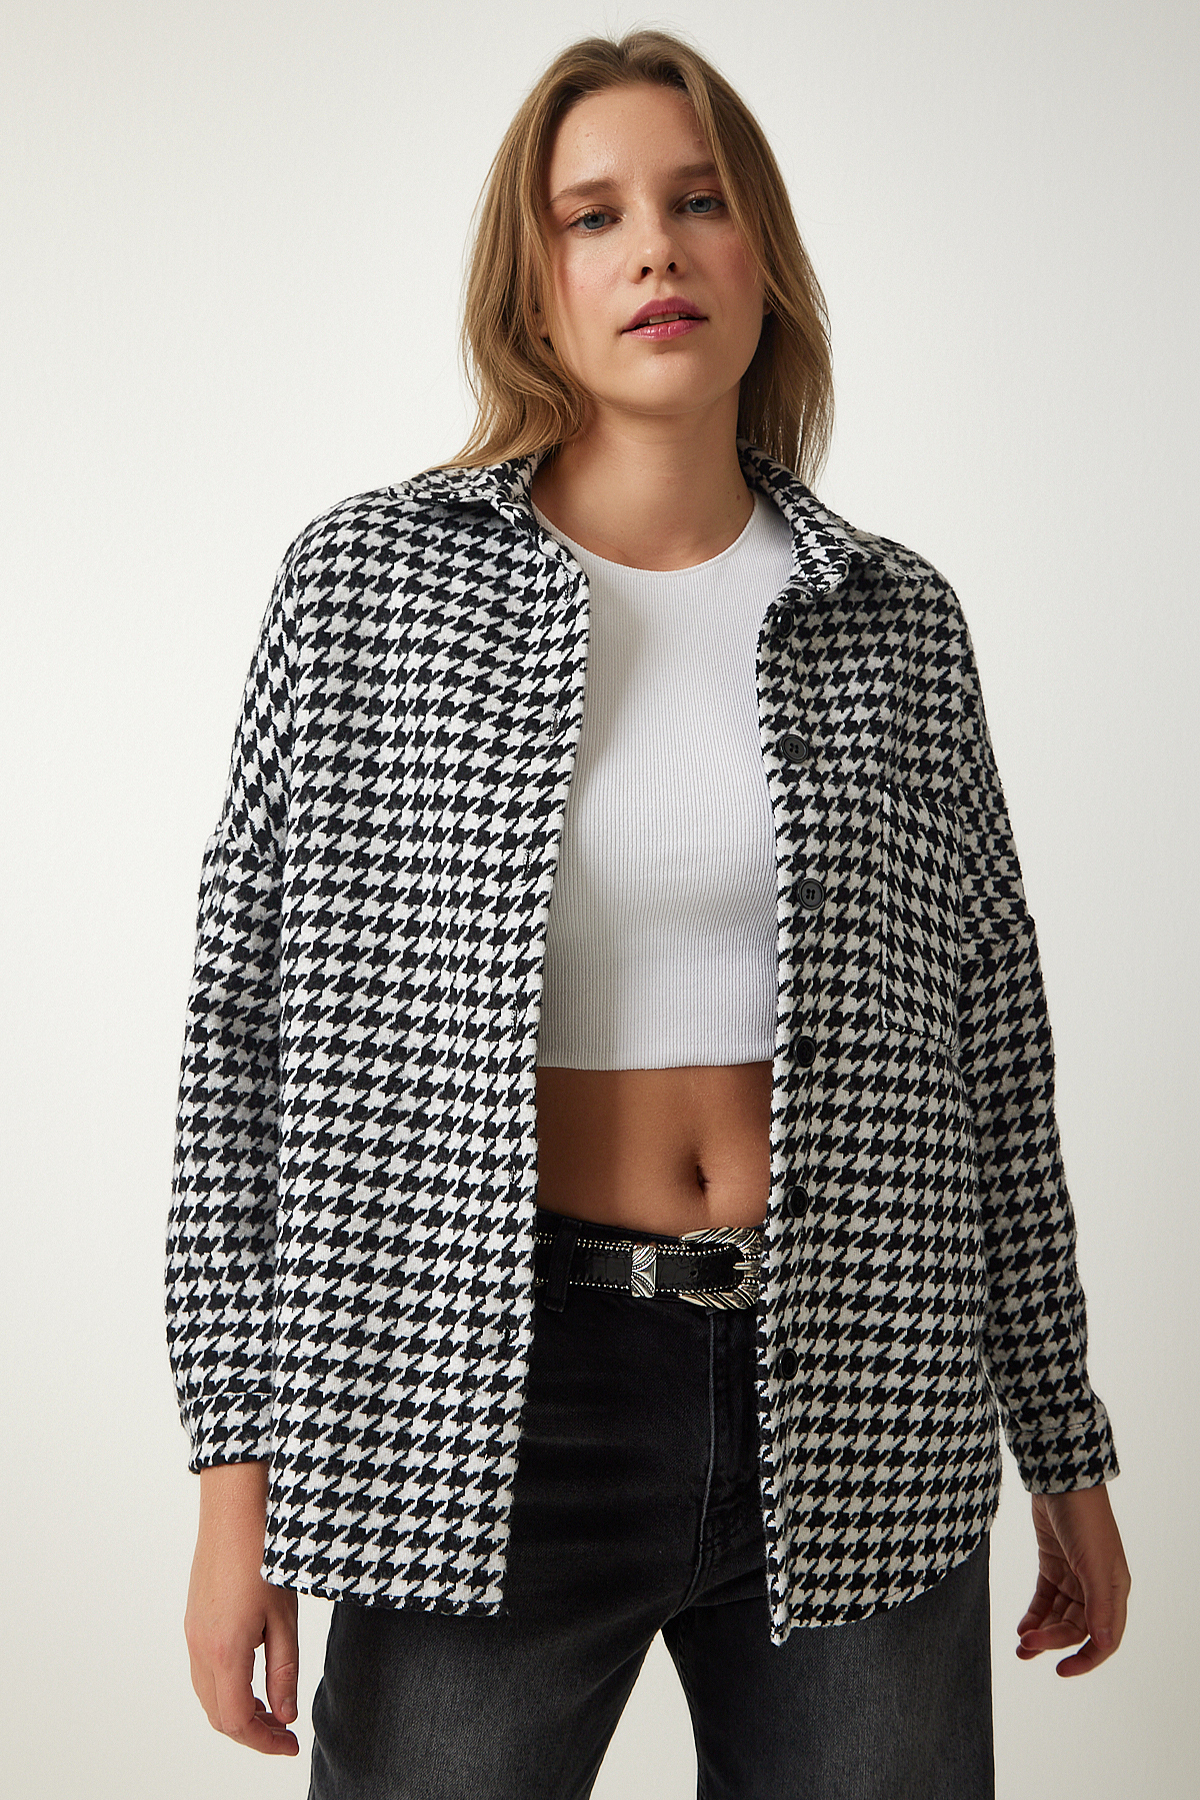 Happiness İstanbul Women's Black and White Houndstooth Patterned Cachet Jacket Shirt